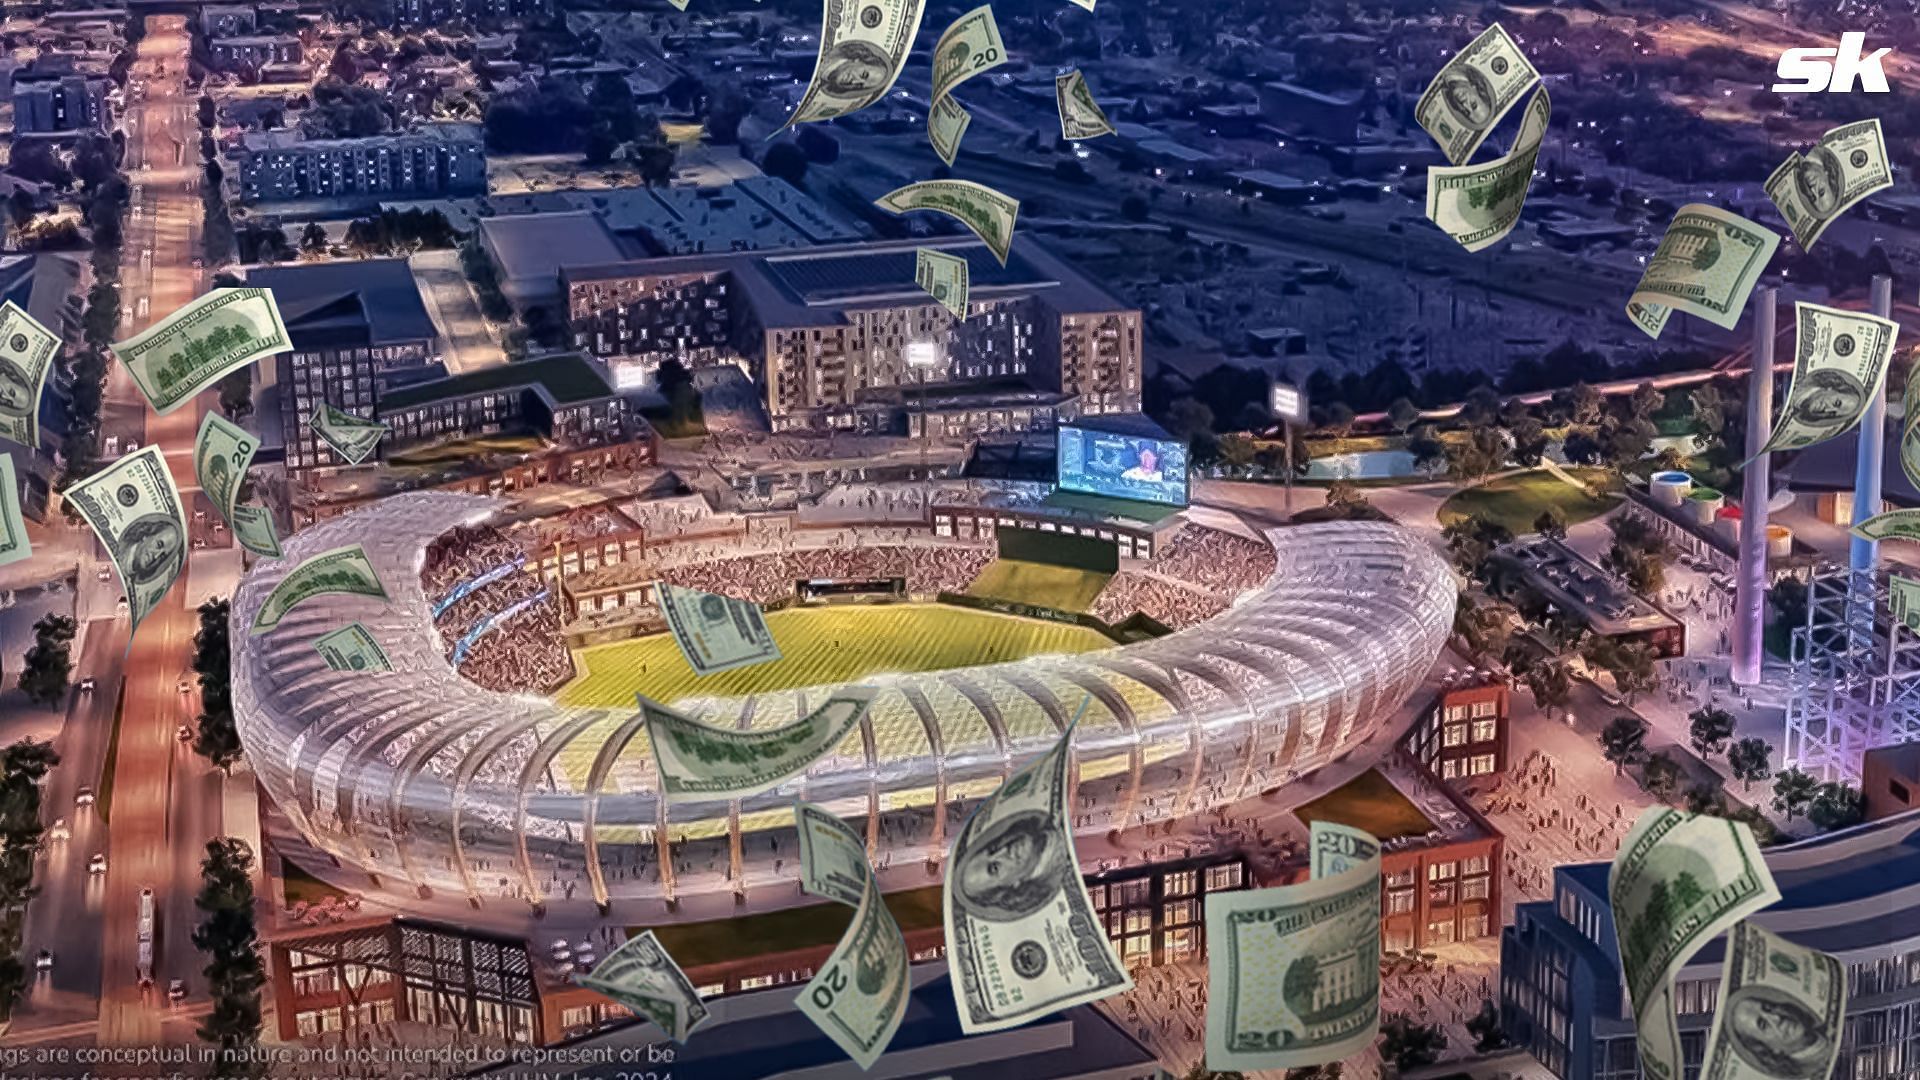 The state of Utah has committed $1 Billion as an investment for MLB stadium.